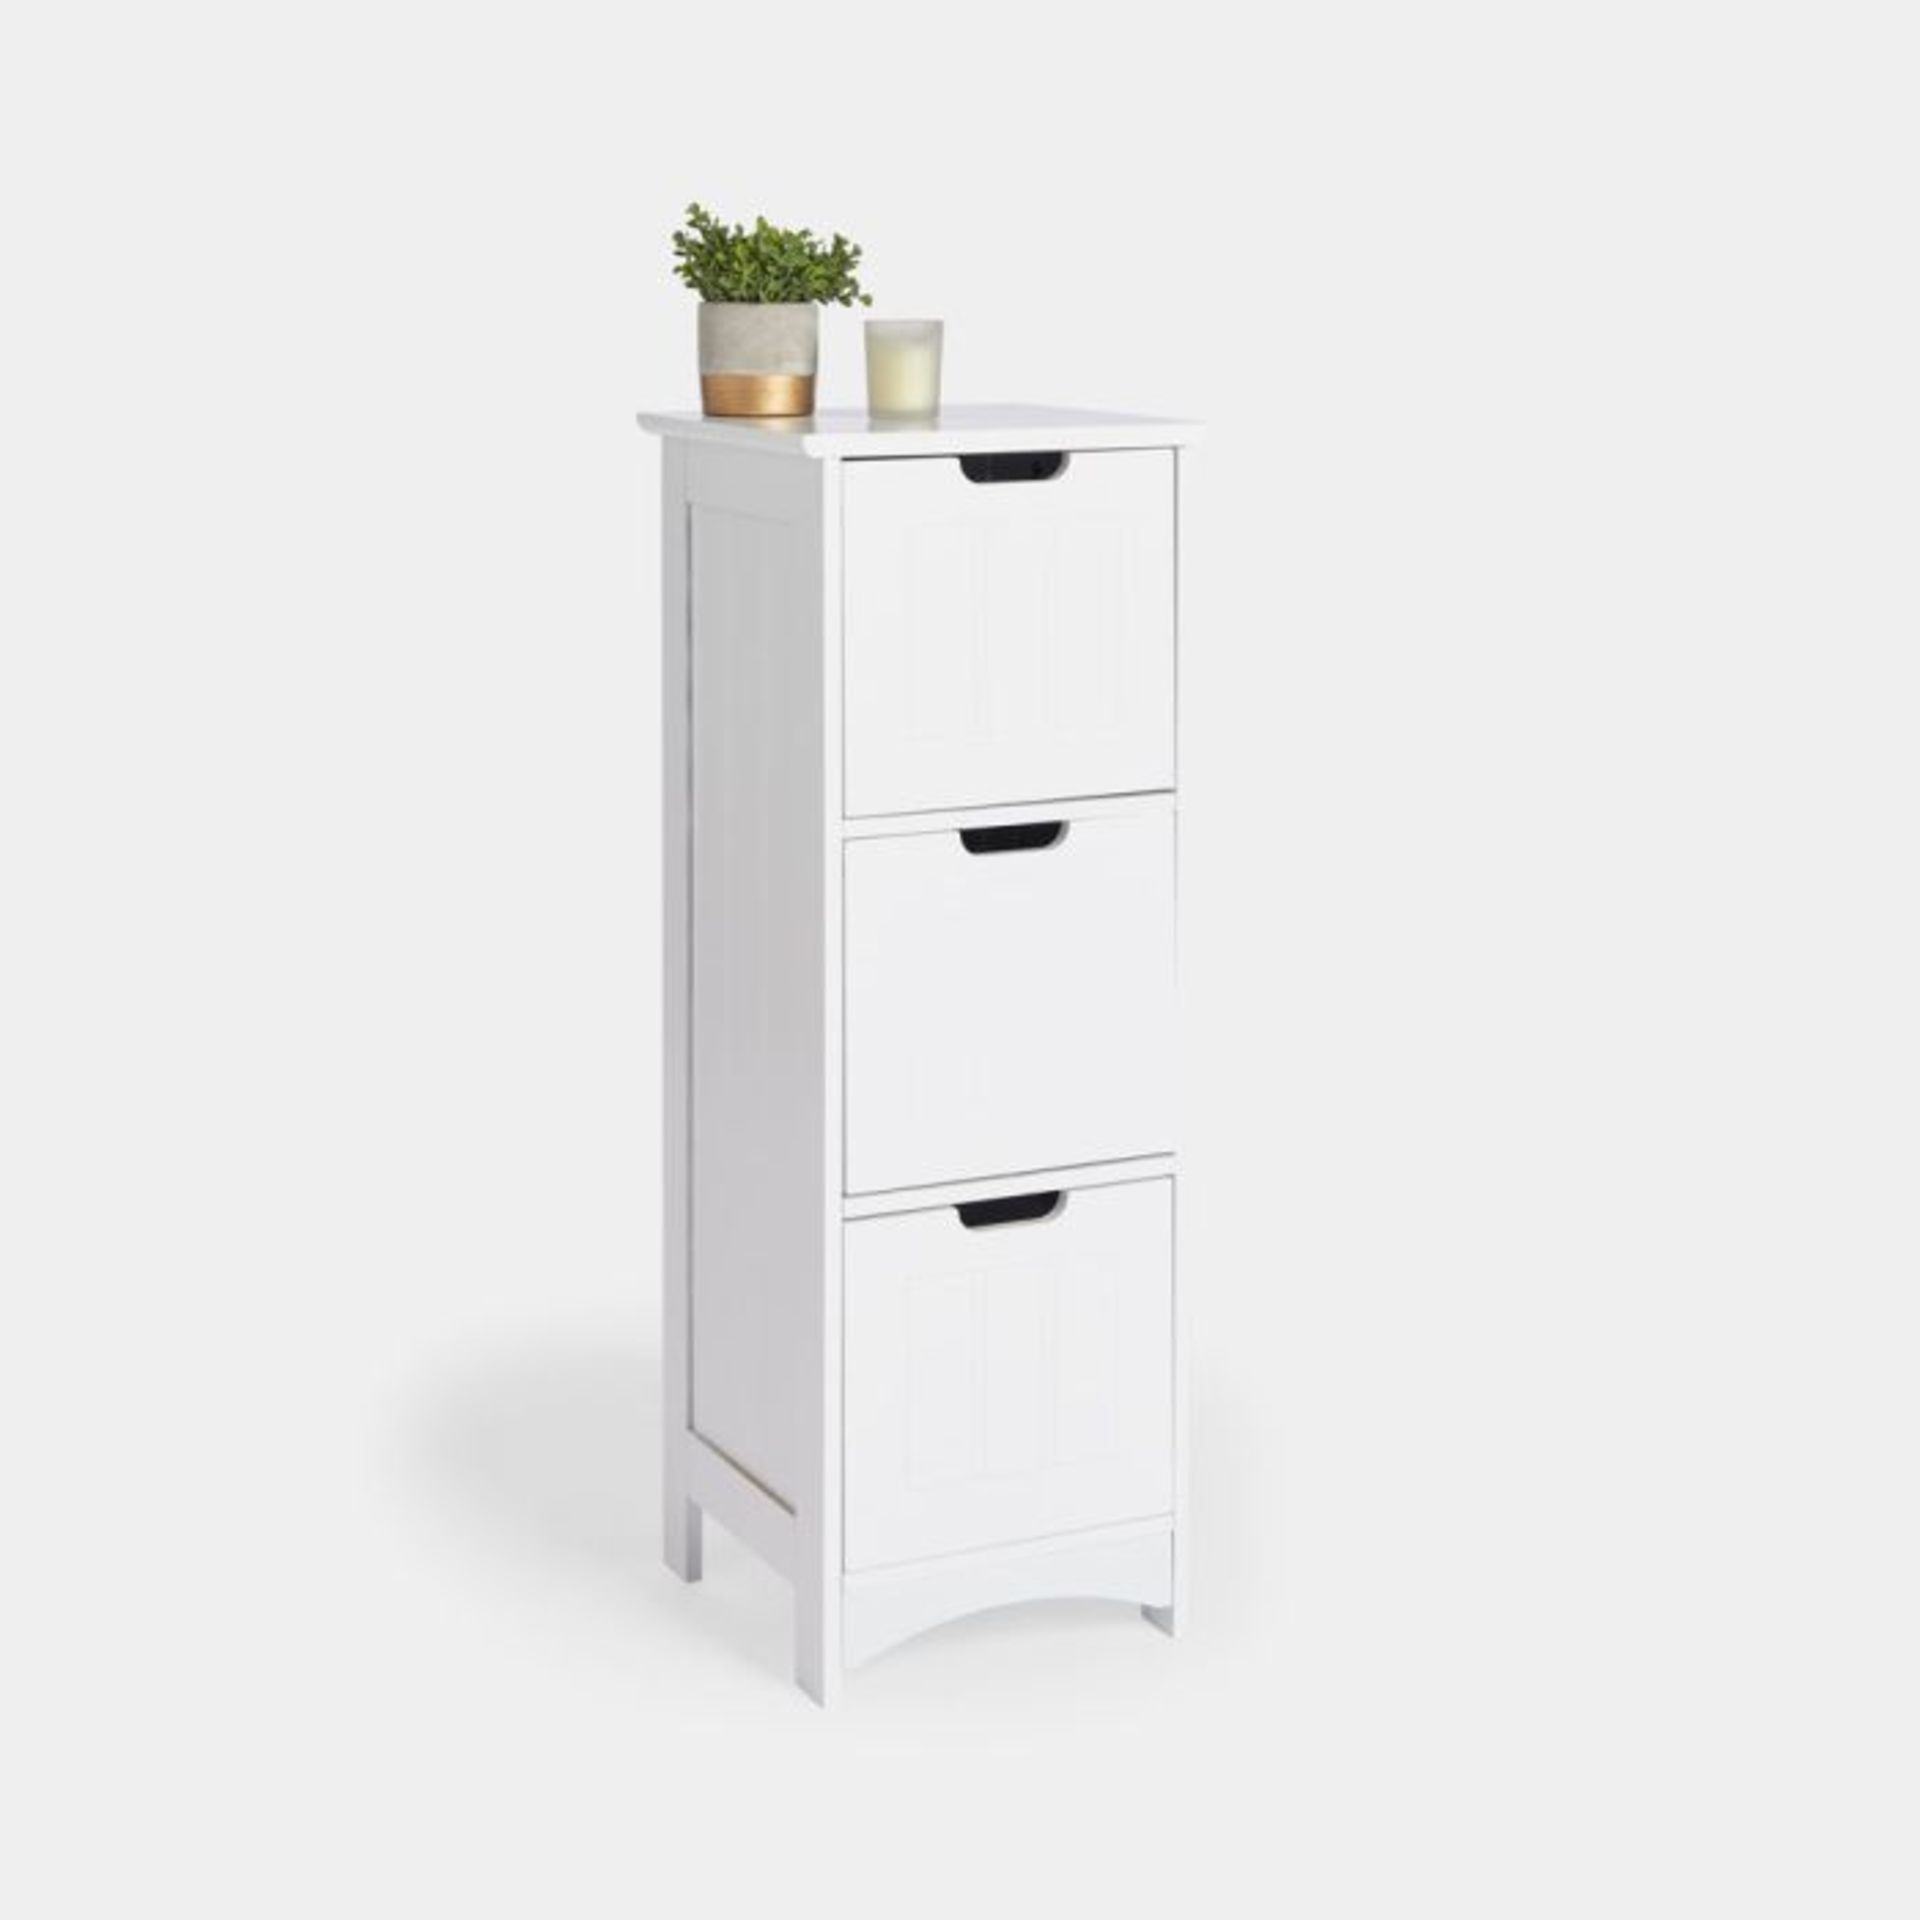 Holbrook White 3 Drawer Bathroom Storage Unit. - ER36. It can be difficult to get the storage you